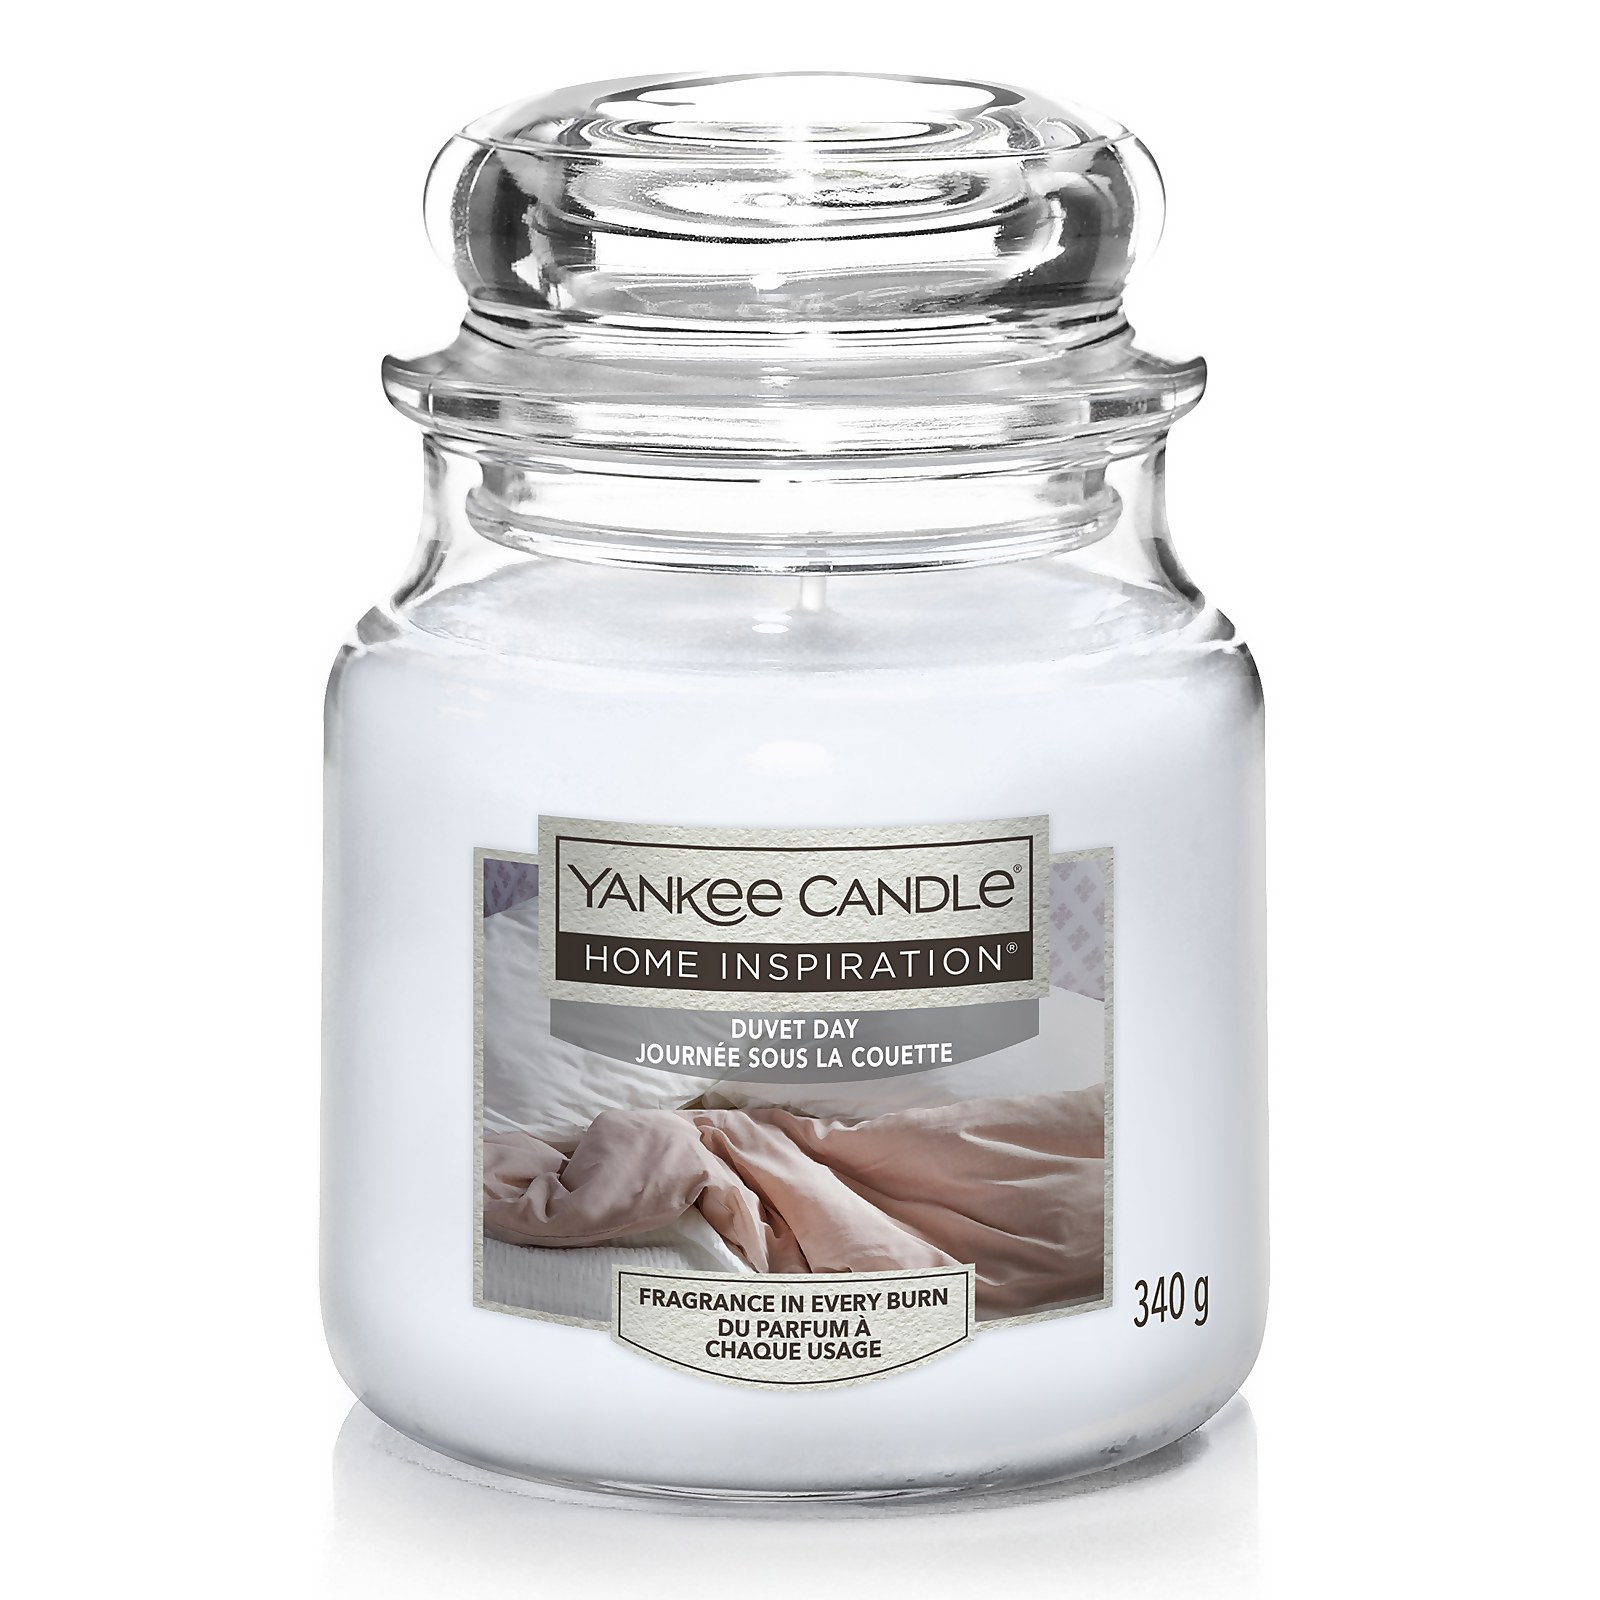 Photo of Yankee Candle Home Inspiration Scented Candle - Medium Jar - Duvet Day